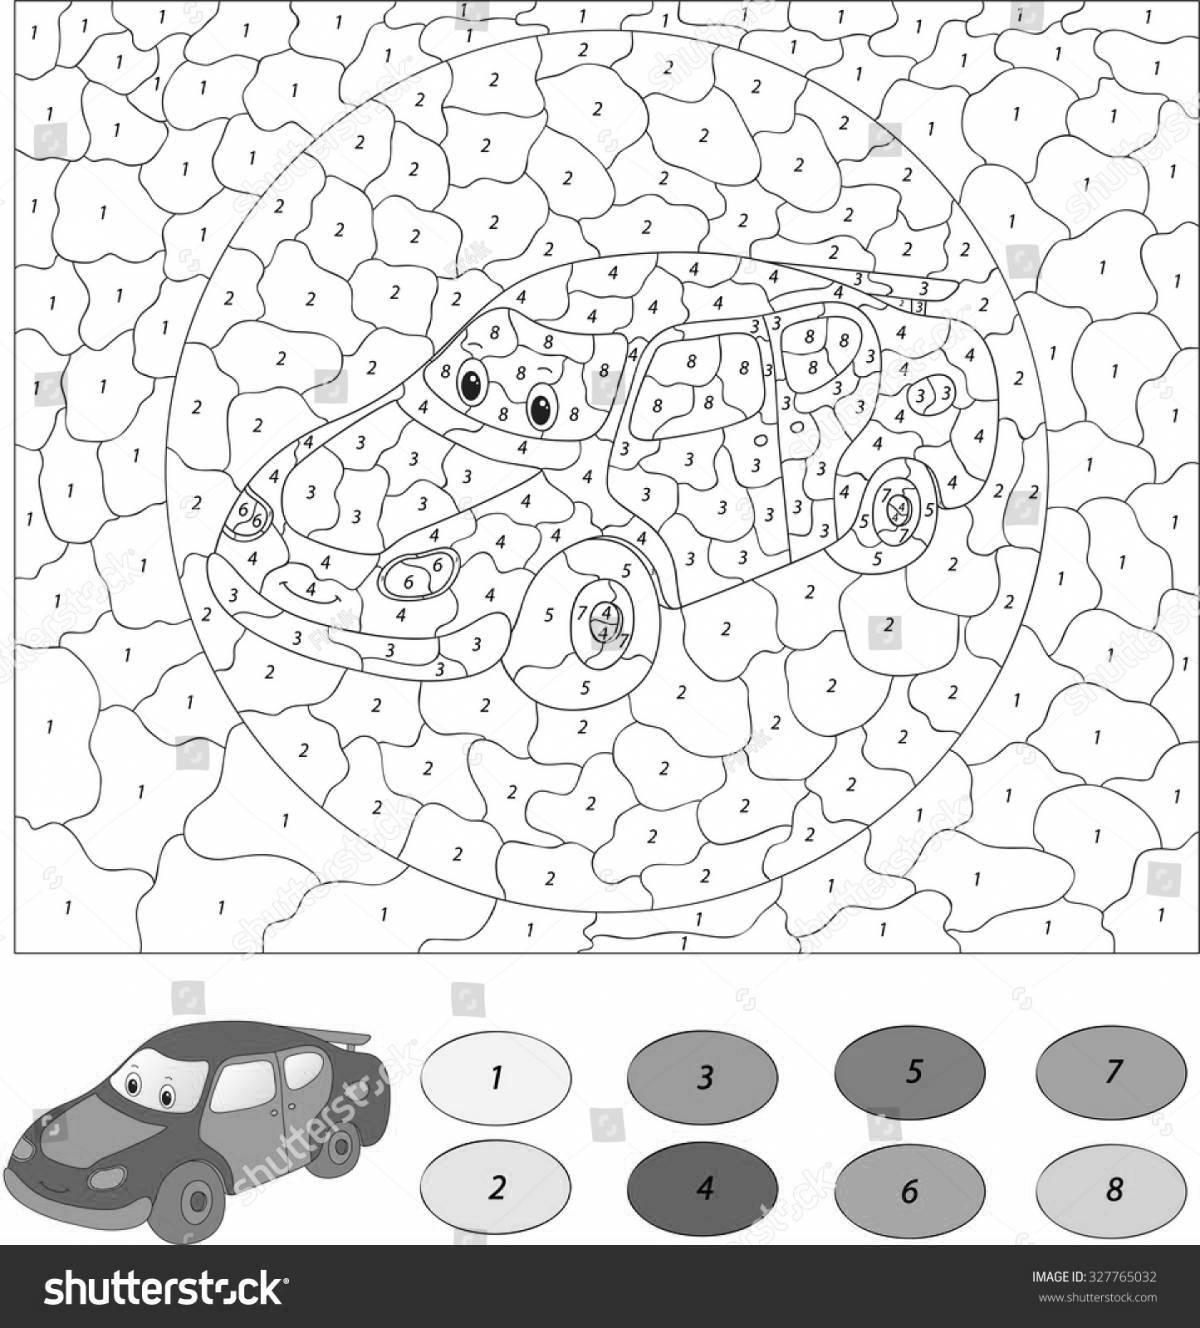 Cute strawberry number coloring game